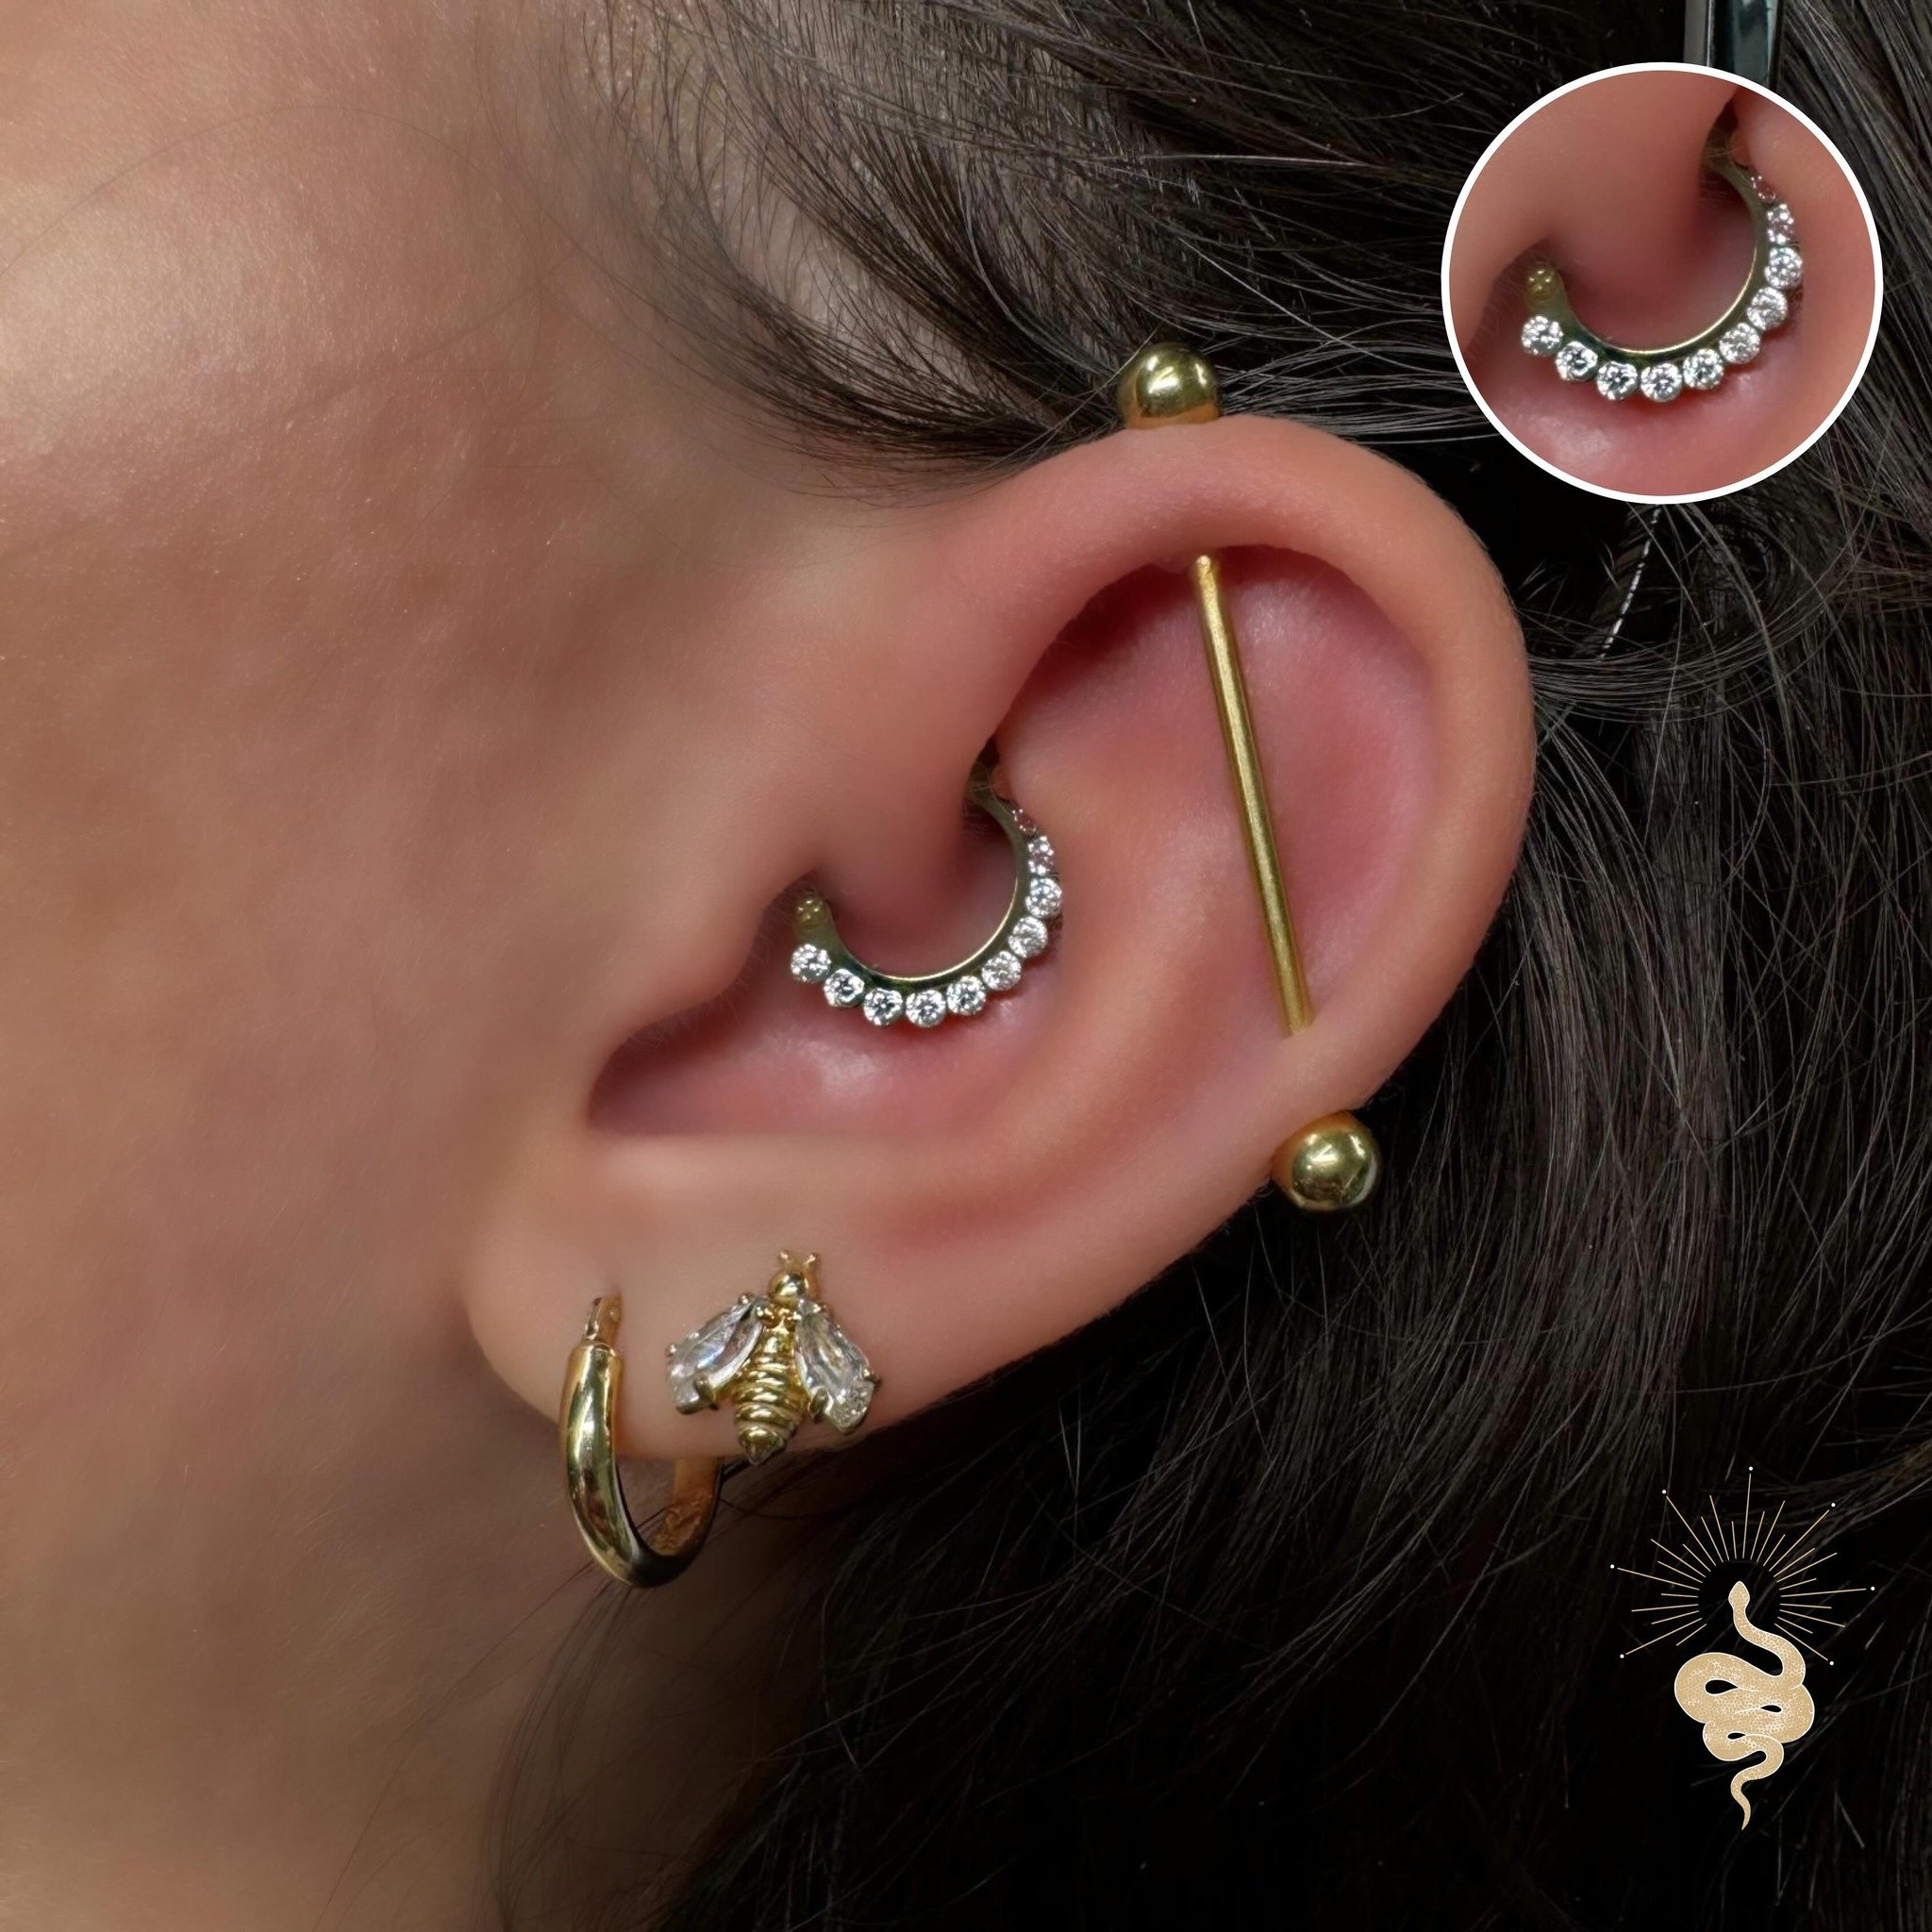 Daith upgrade - Anodised Gold Titanium Crystal Clicker 🤩

📍 Studio 59 Tattoos
3-5 Victoria Road, MK2 2NG Milton Keynes
💌 Message to book in - or ring 01908 990232 📞

#piercing #piercings #tattoo #bodypiercing #pierced #piercer #safepiercing #sept